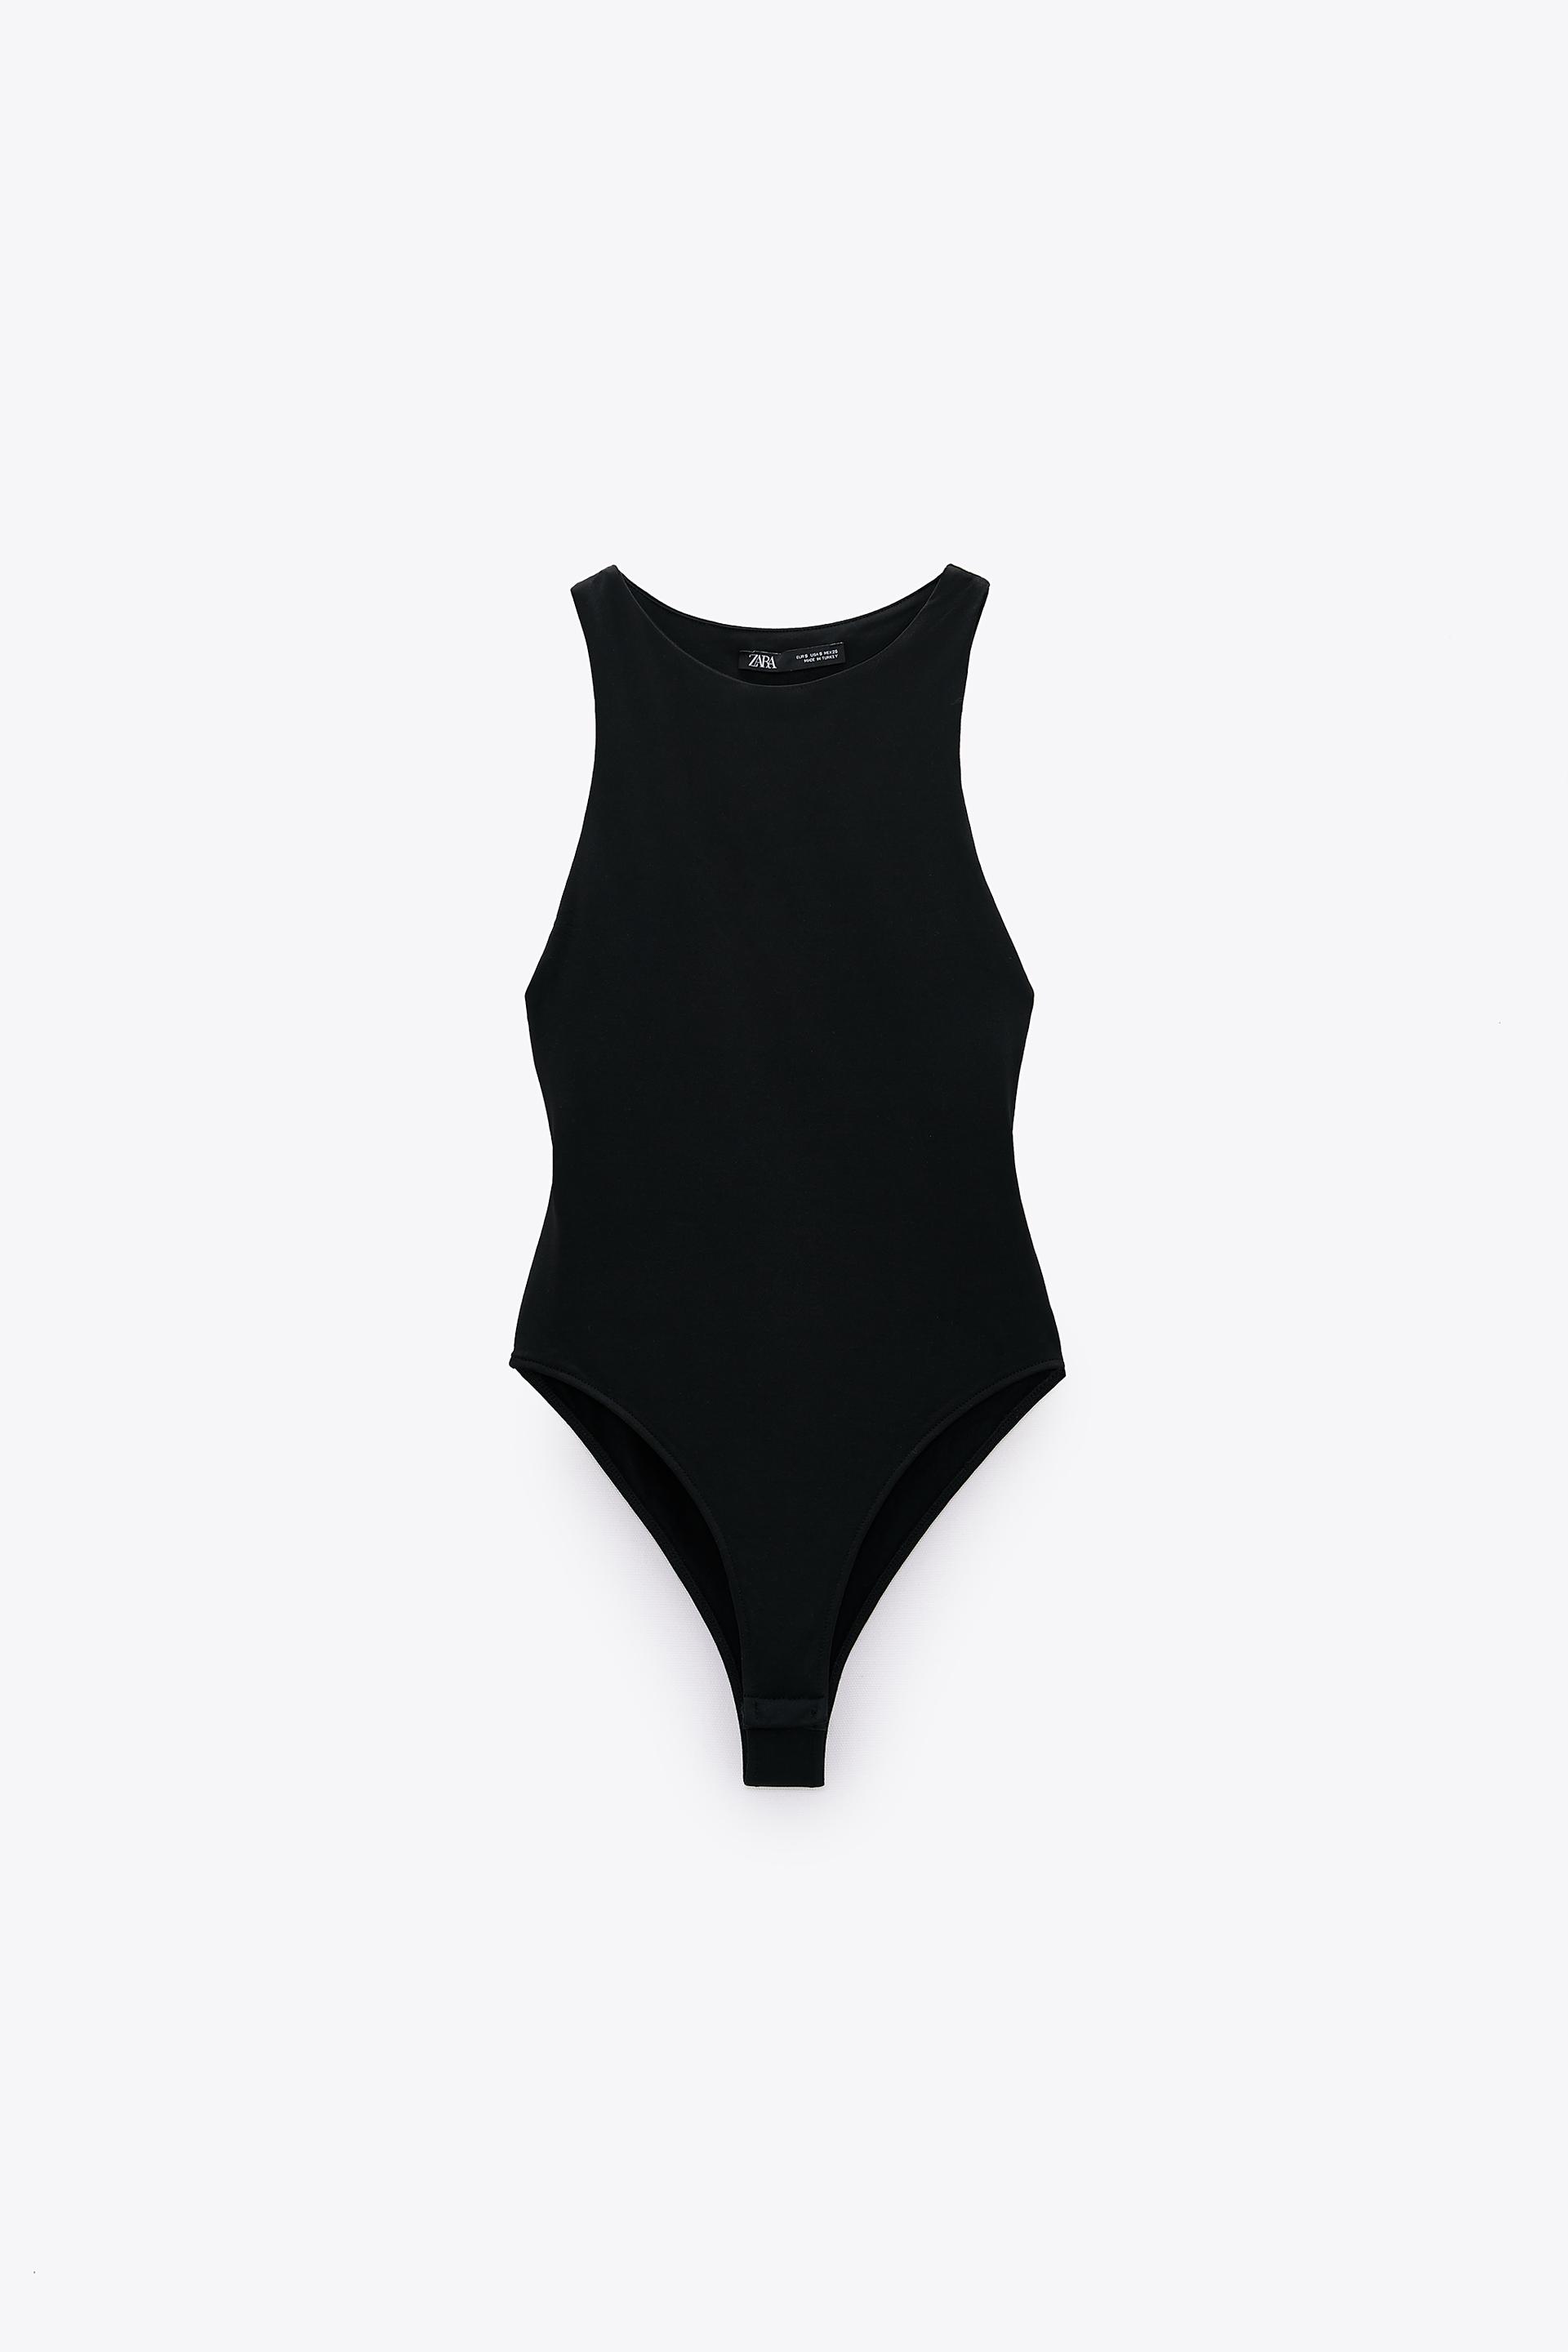 ZARA KNIT CUT OUT HALTER NECK BODYSUIT - $64 New With